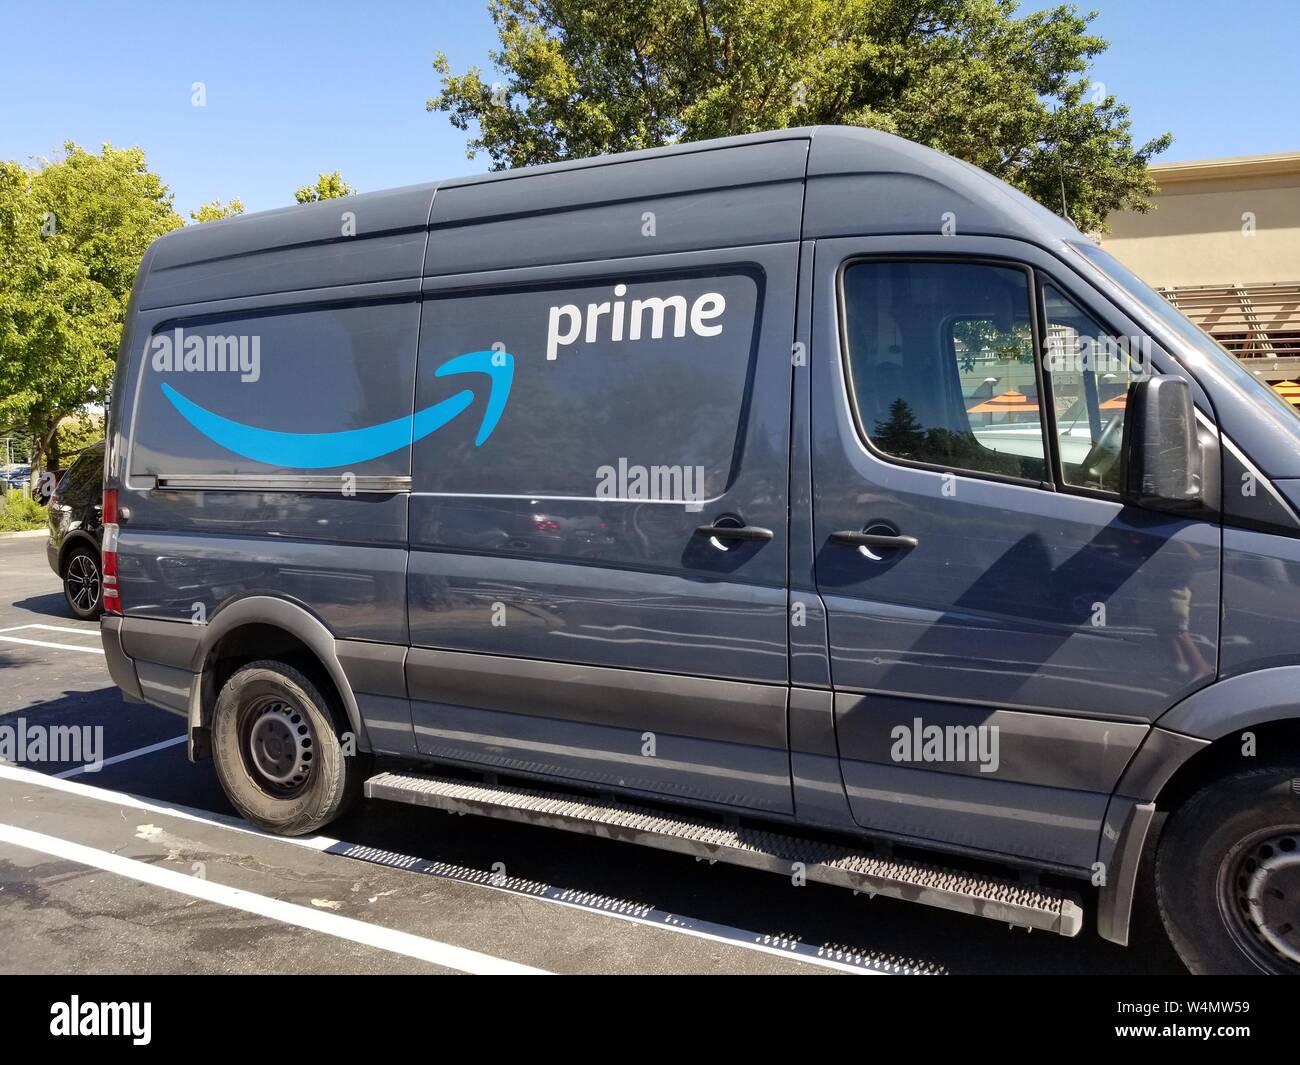 Close Up Of Logo For Amazon Prime Service On The Side Of A Branded Delivery Truck In San Ramon California Amazon Announced That It Would Hire Thousands More Delivery Drivers To Increase 1